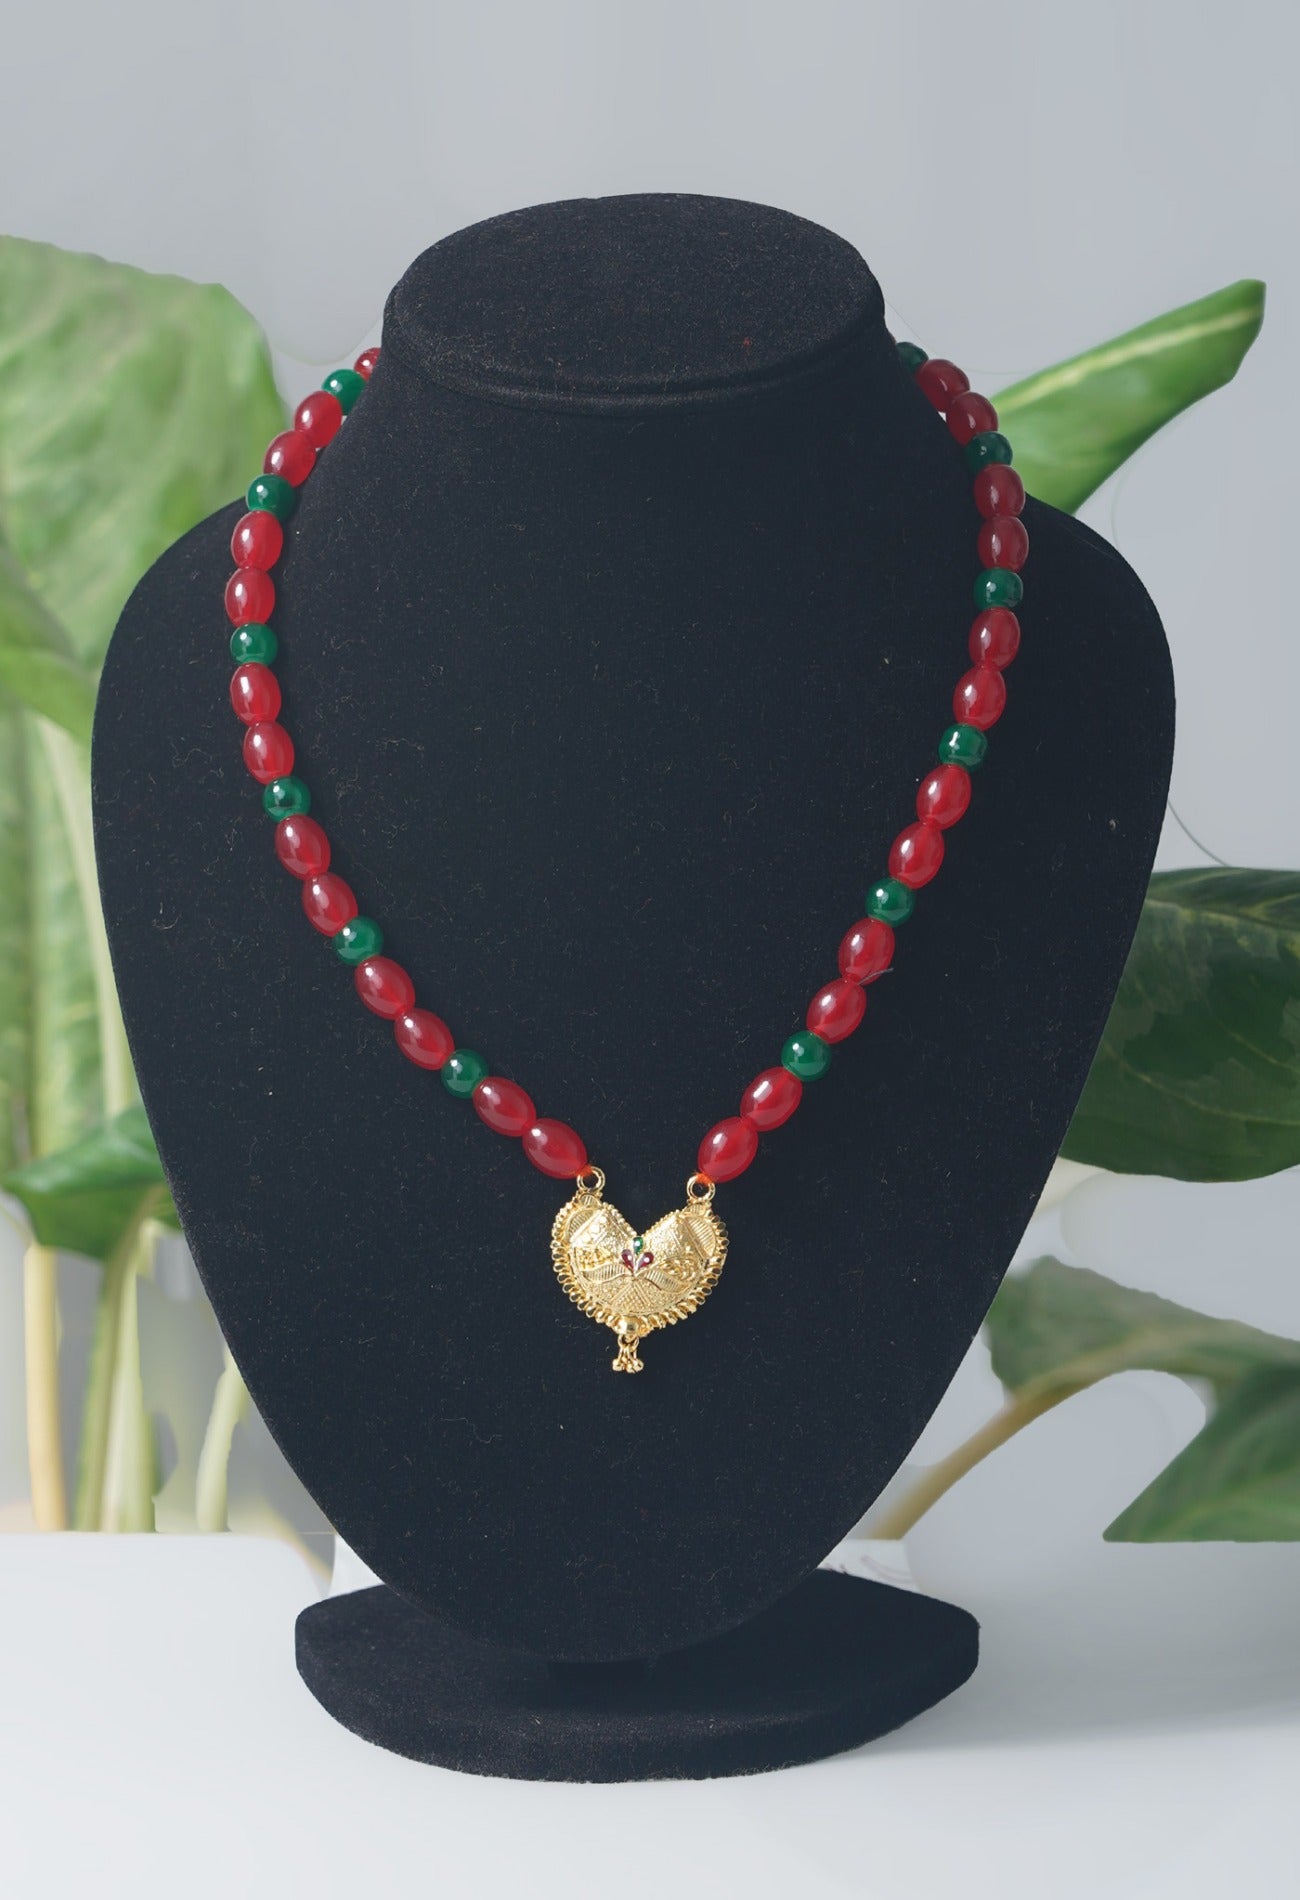 Online Shopping for Multi Amravati Round Beads Necklace with Pendent with jewellery from Andhra pradesh at Unnatisilks.com India
